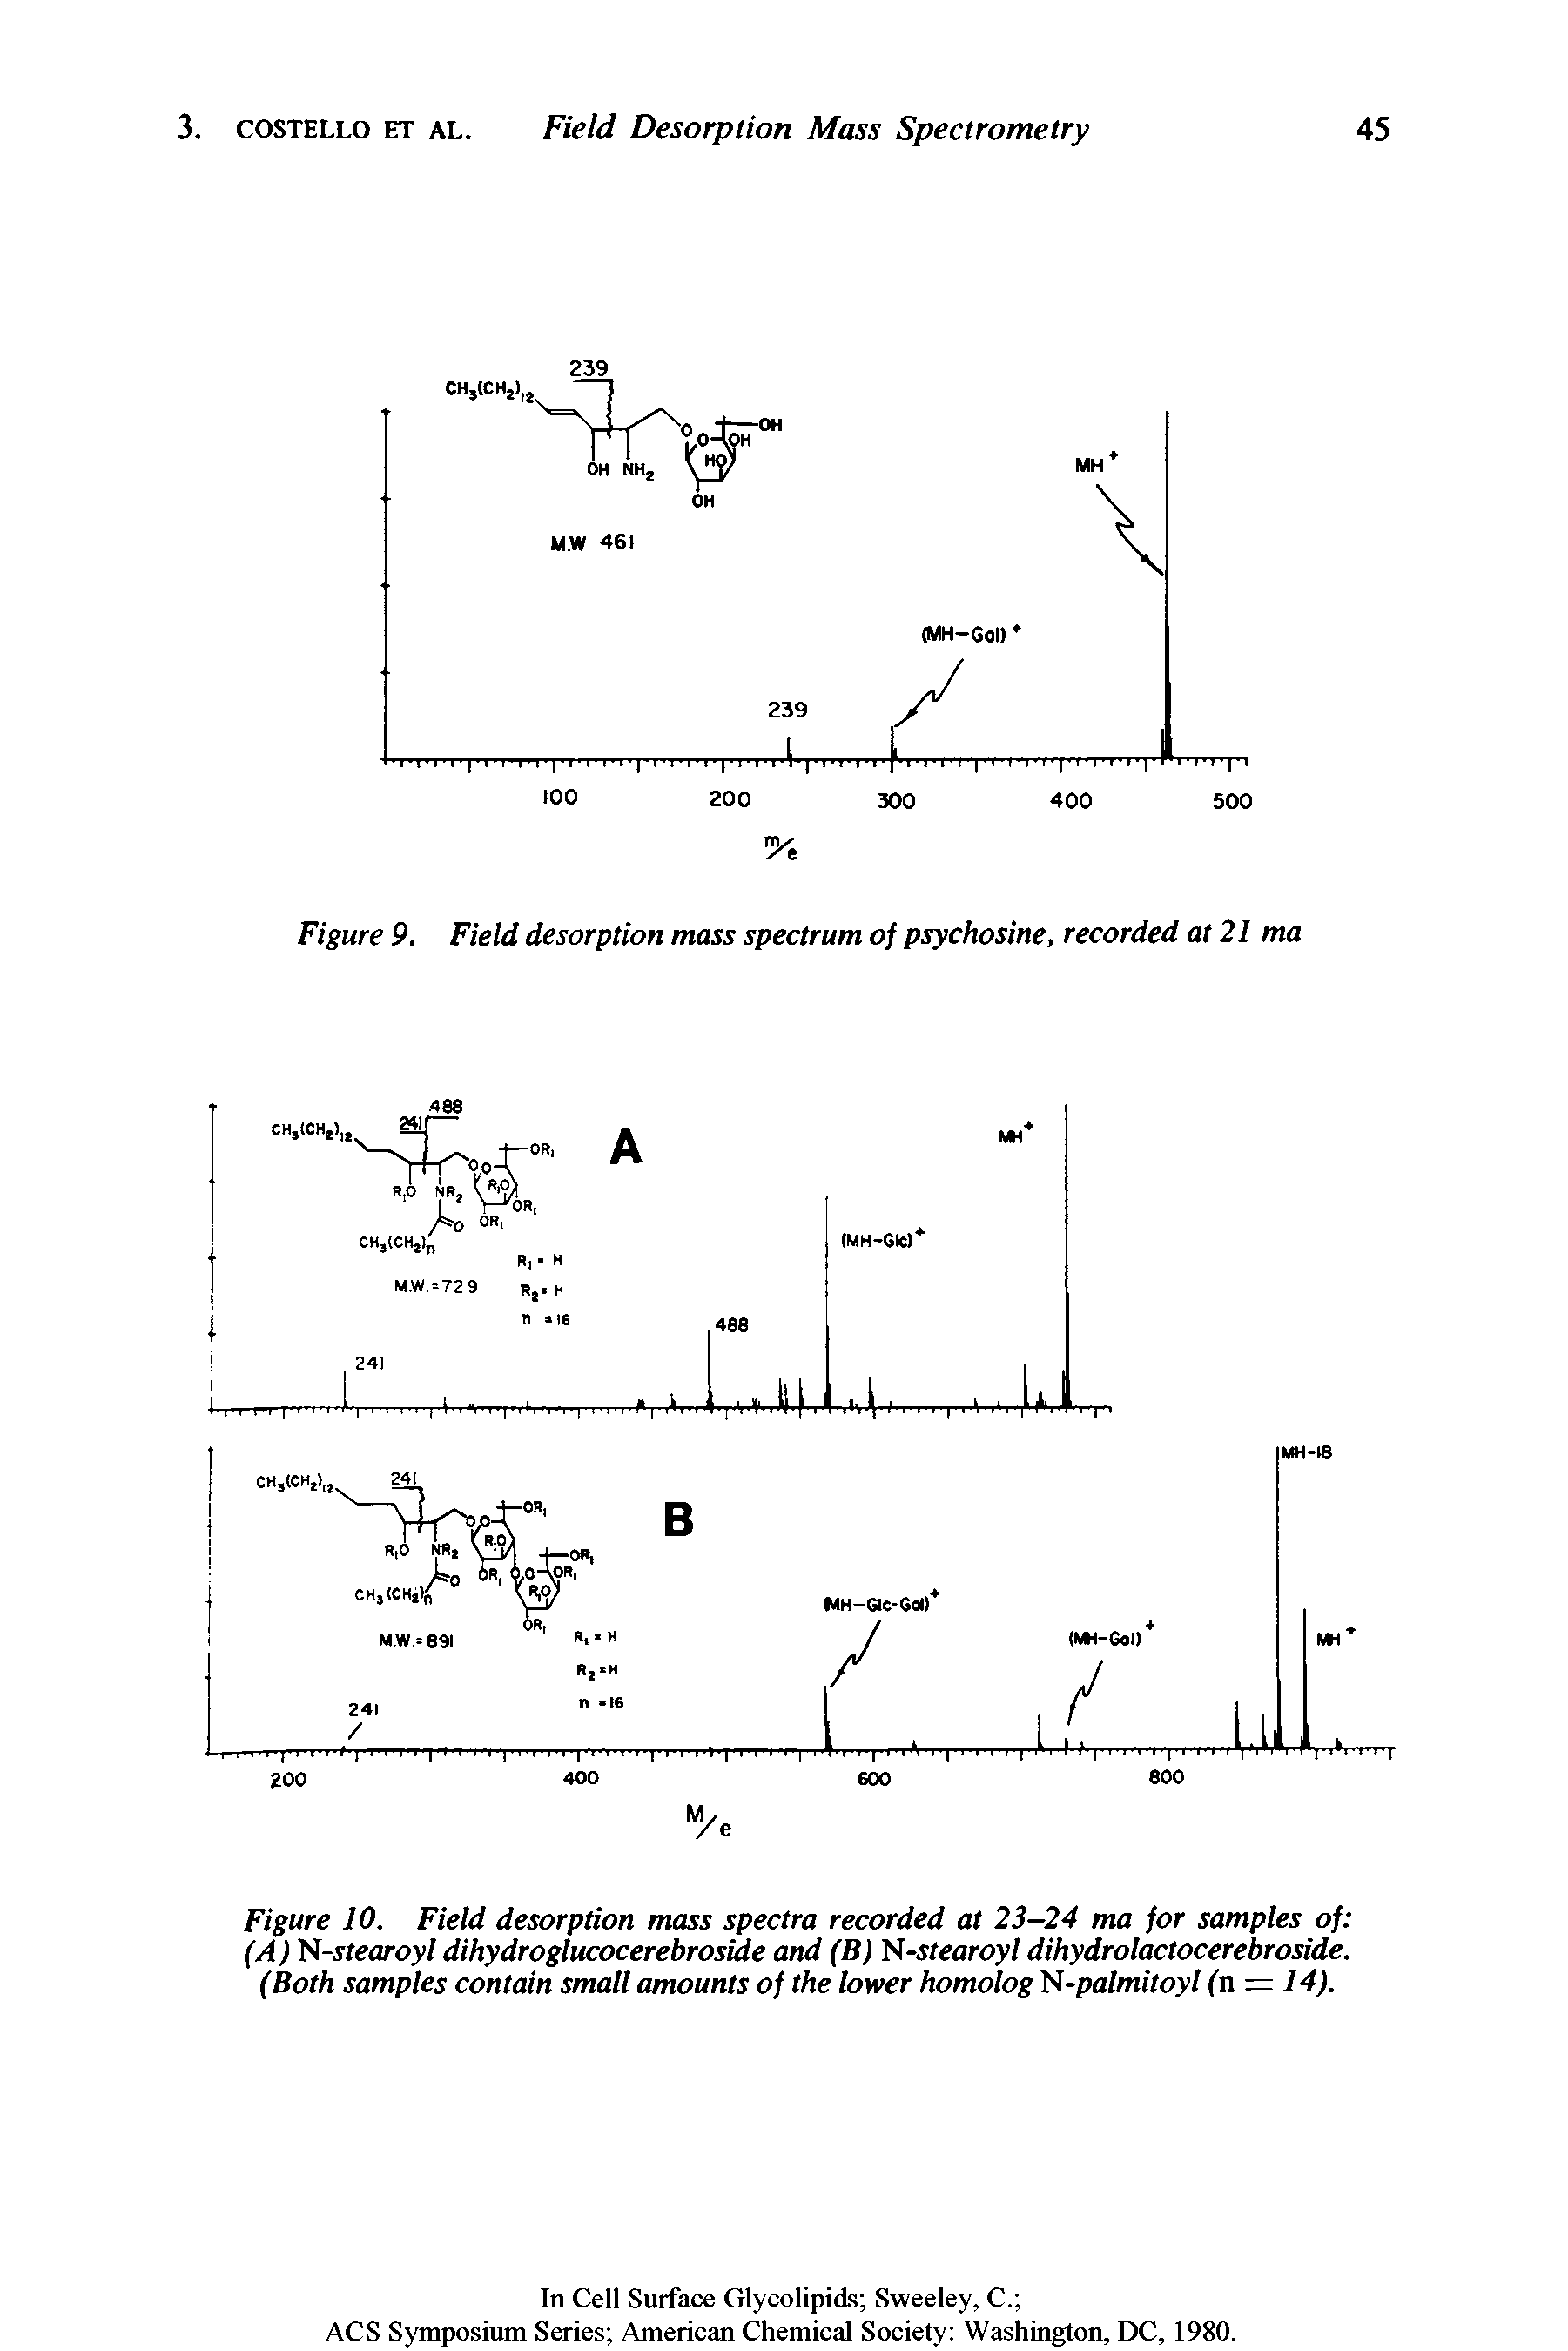 Figure 10. Field desorption mass spectra recorded at 23-24 ma for samples of (A) N-stearoyl dihydroglucocerebroside and (B) N-stearoyl dihydrolactocerebroside. (Both samples contain small amounts of the lower homolog H-palmitoyl fn = 14).